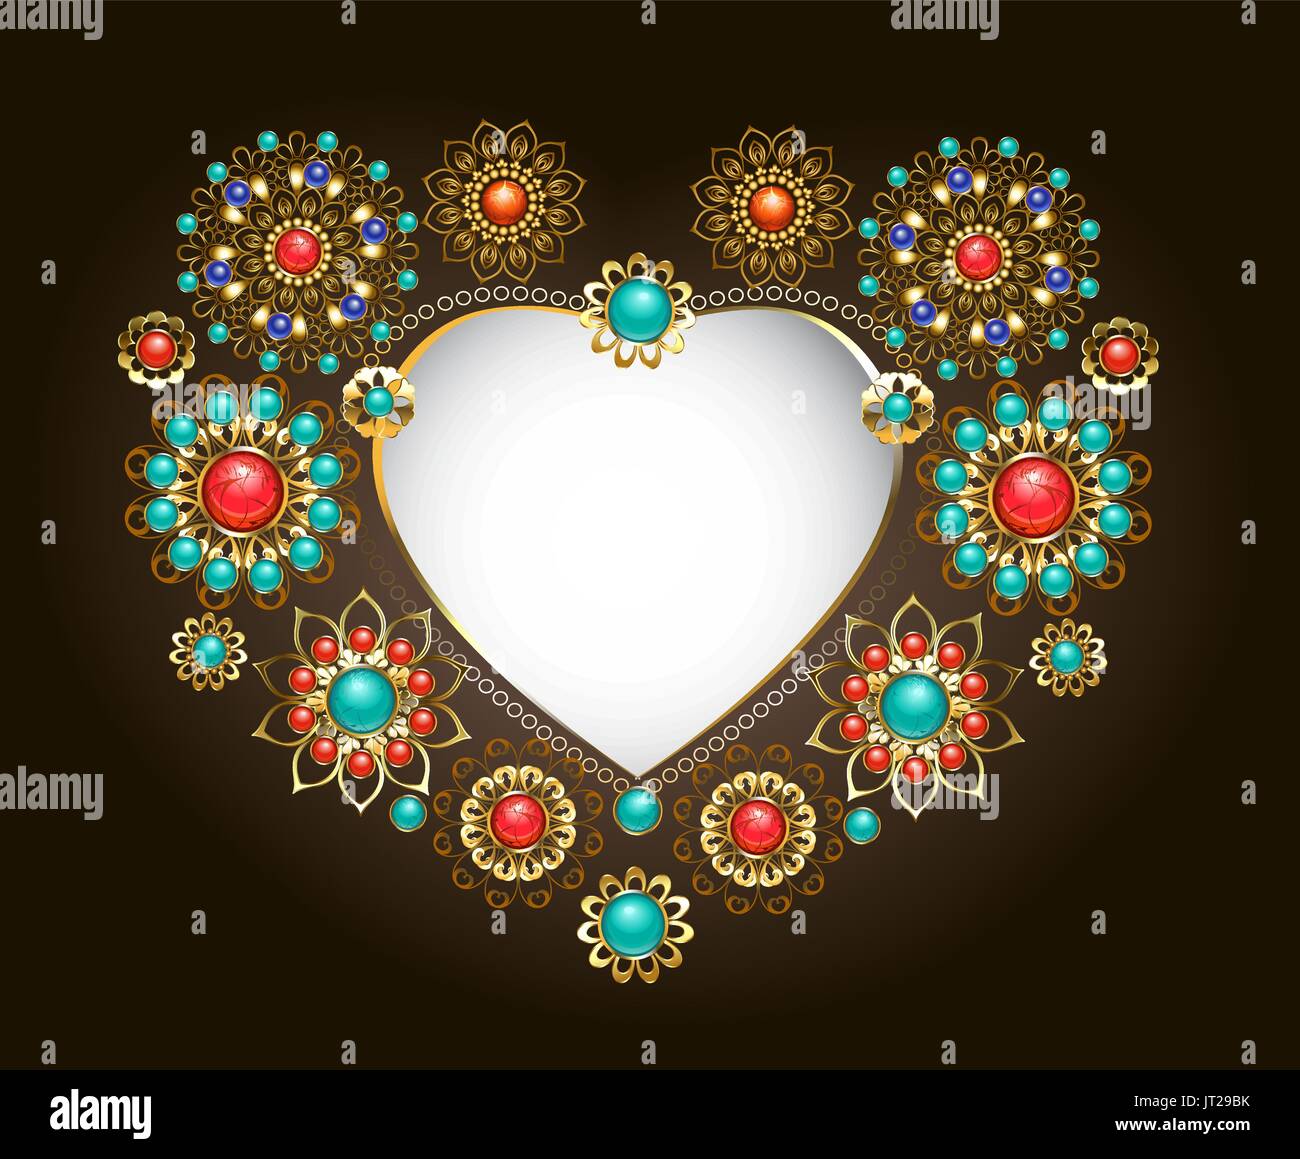 Ethnic frame in the form of a heart, decorated with turquoise and jasper on a dark background. Jewelery in boho style. Stock Vector